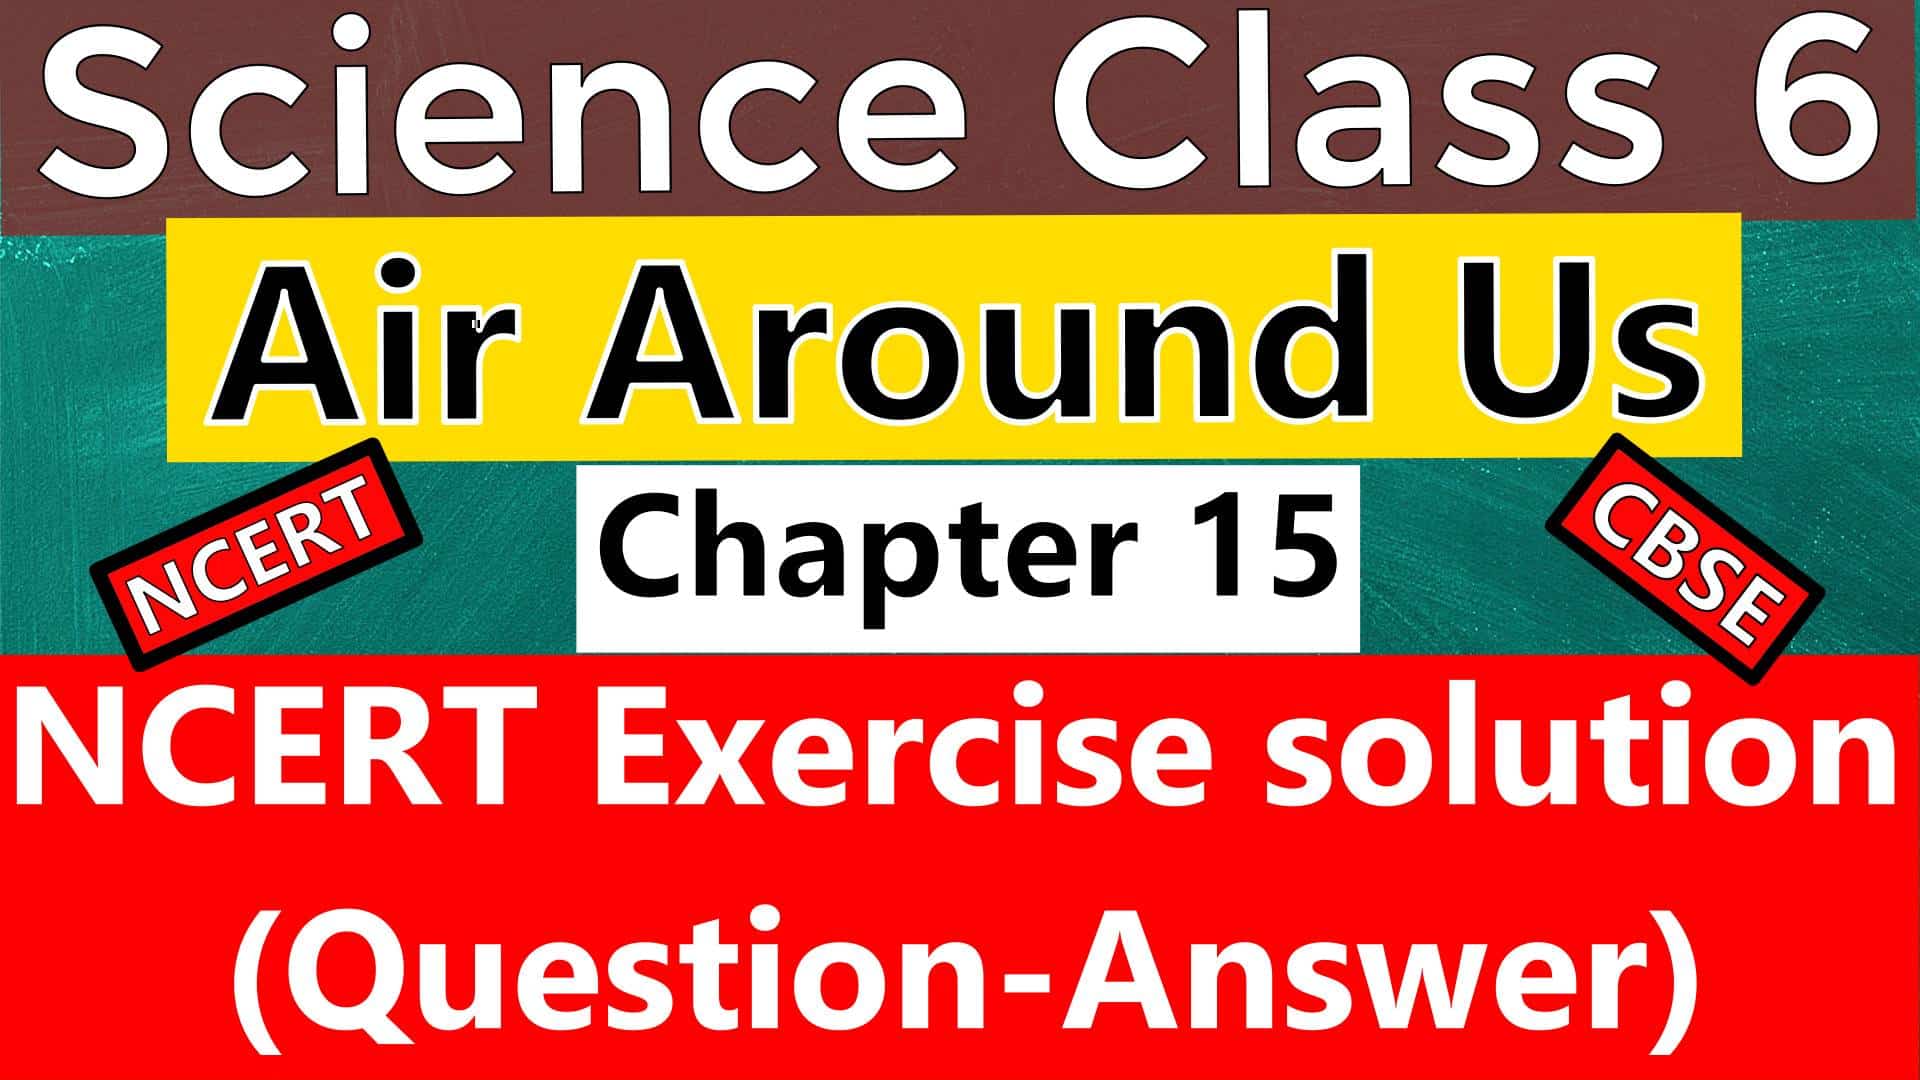 Aerobics Questions And Answers